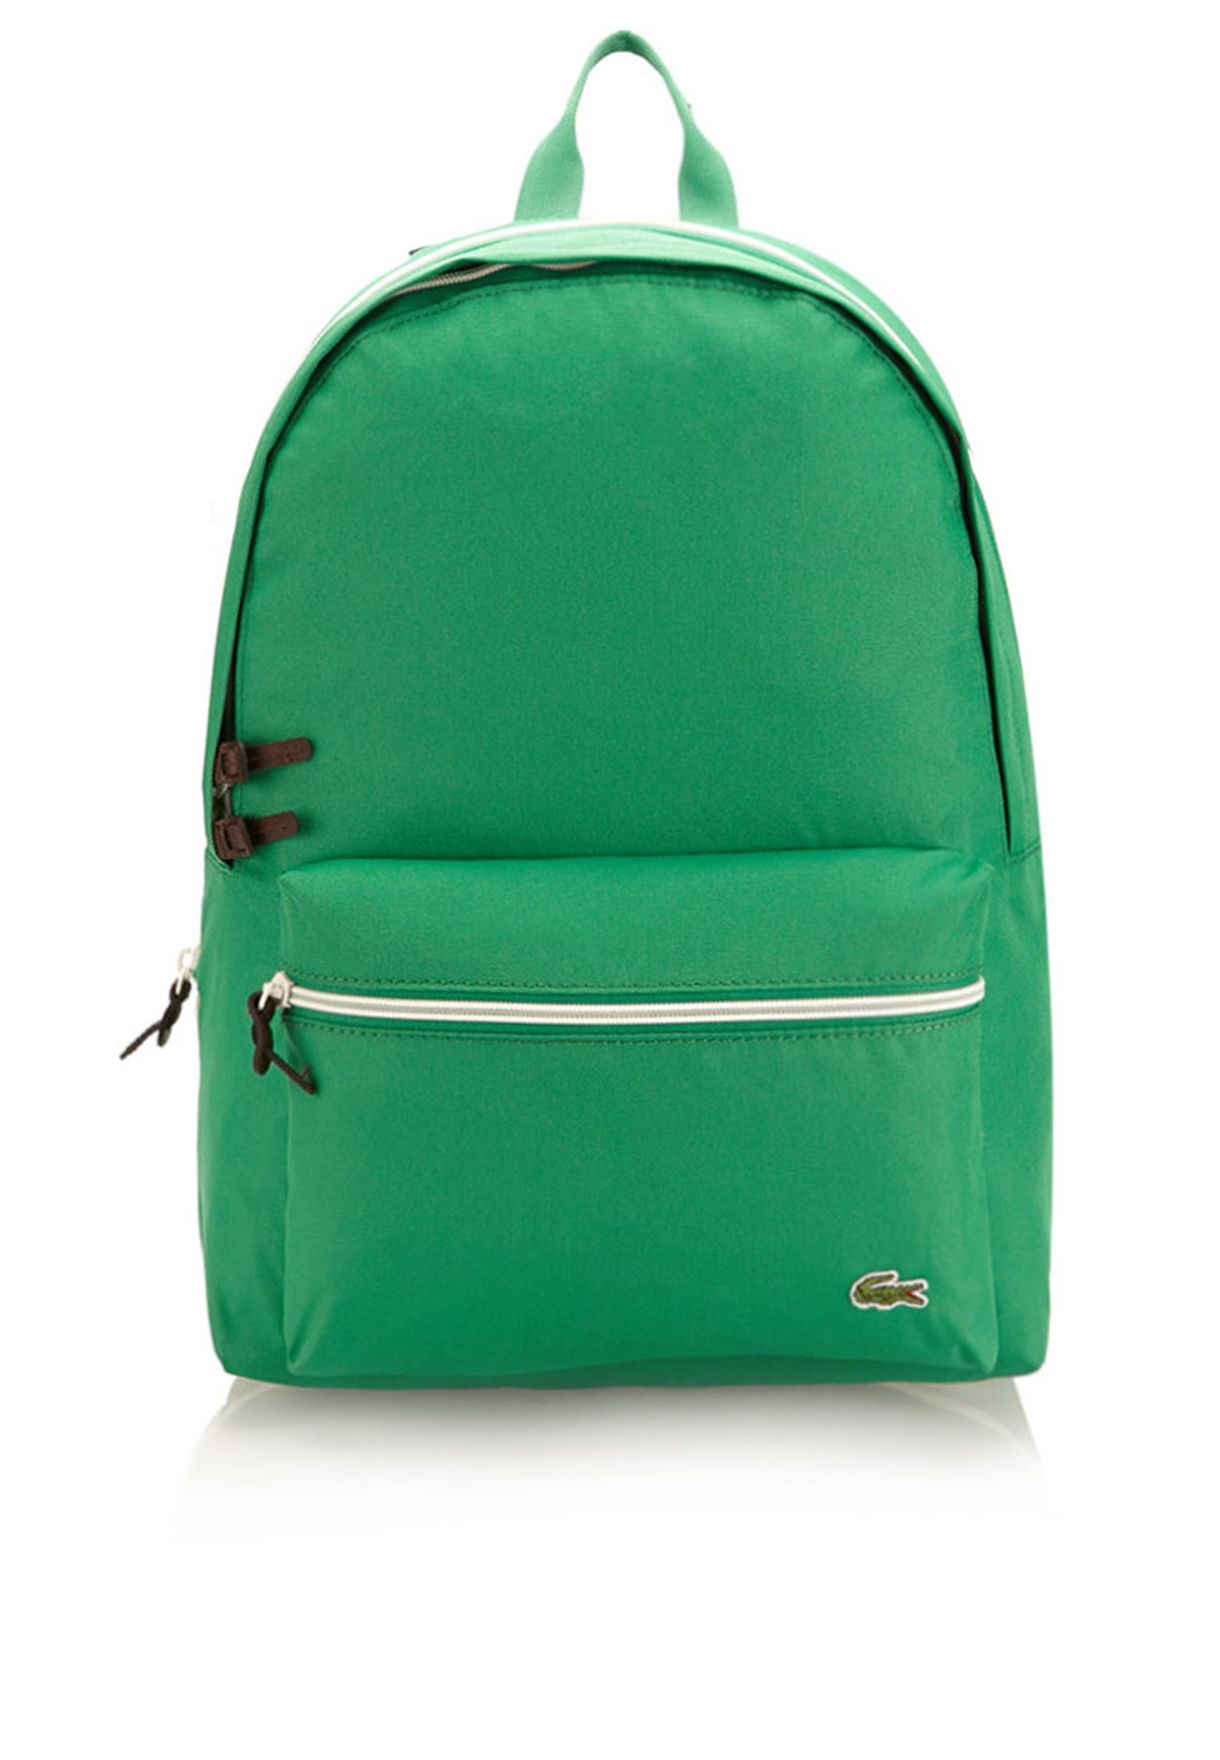 lacoste backpack green off 76% - online 